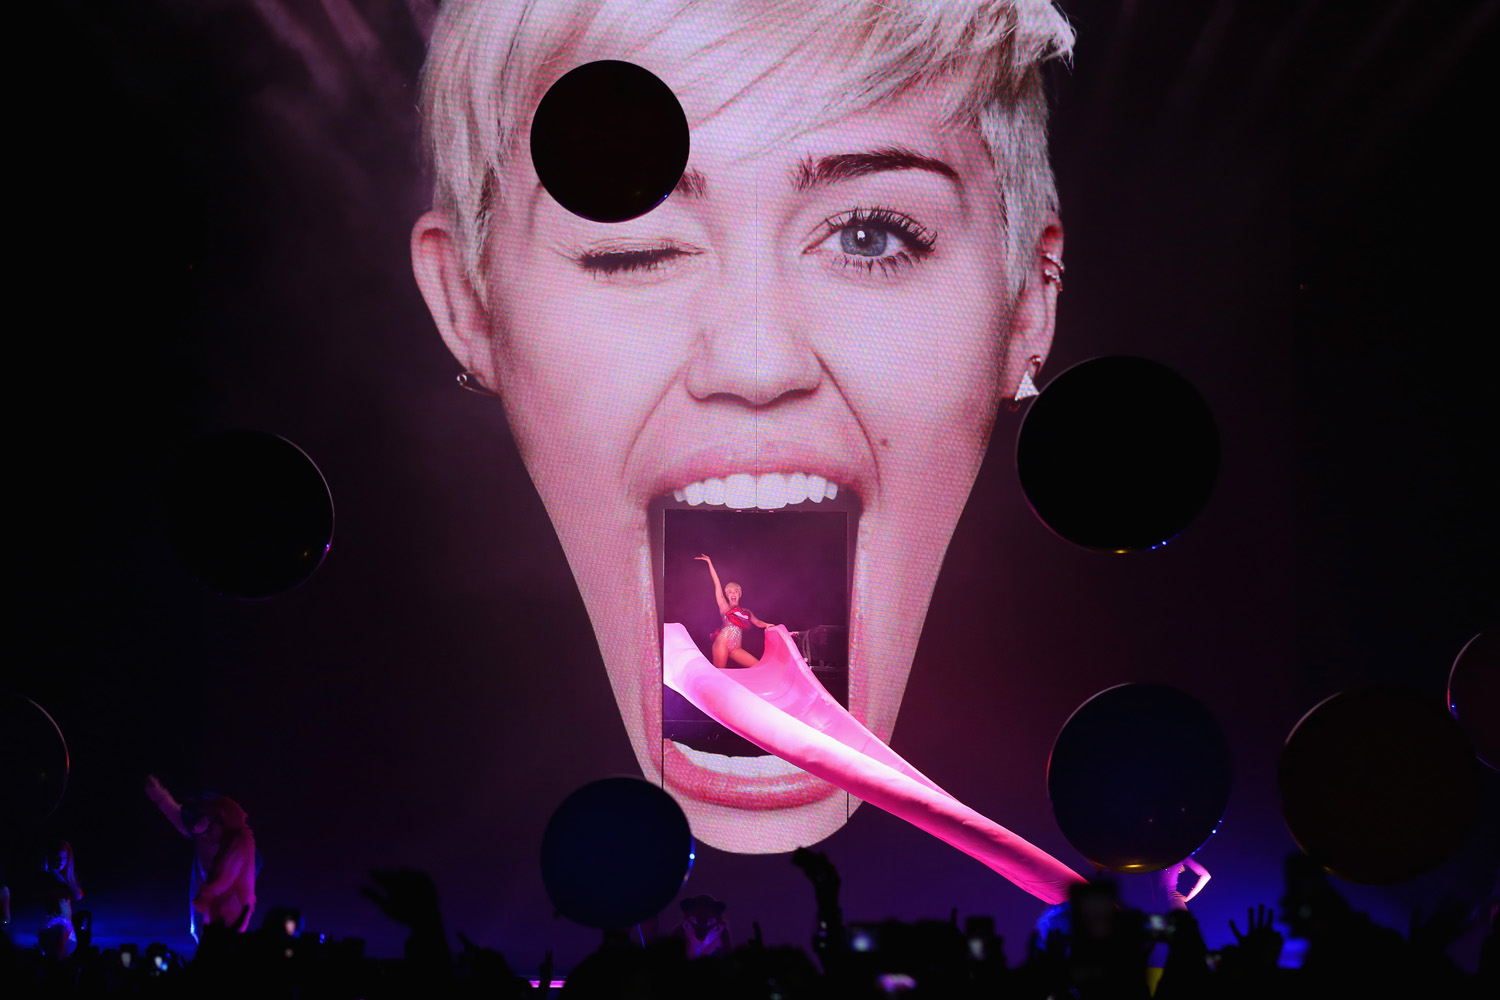 Miley Cyrus performs live on stage at 02 Arena on May 6, 2014 in London, England. (Simone Joyner—Getty Images)